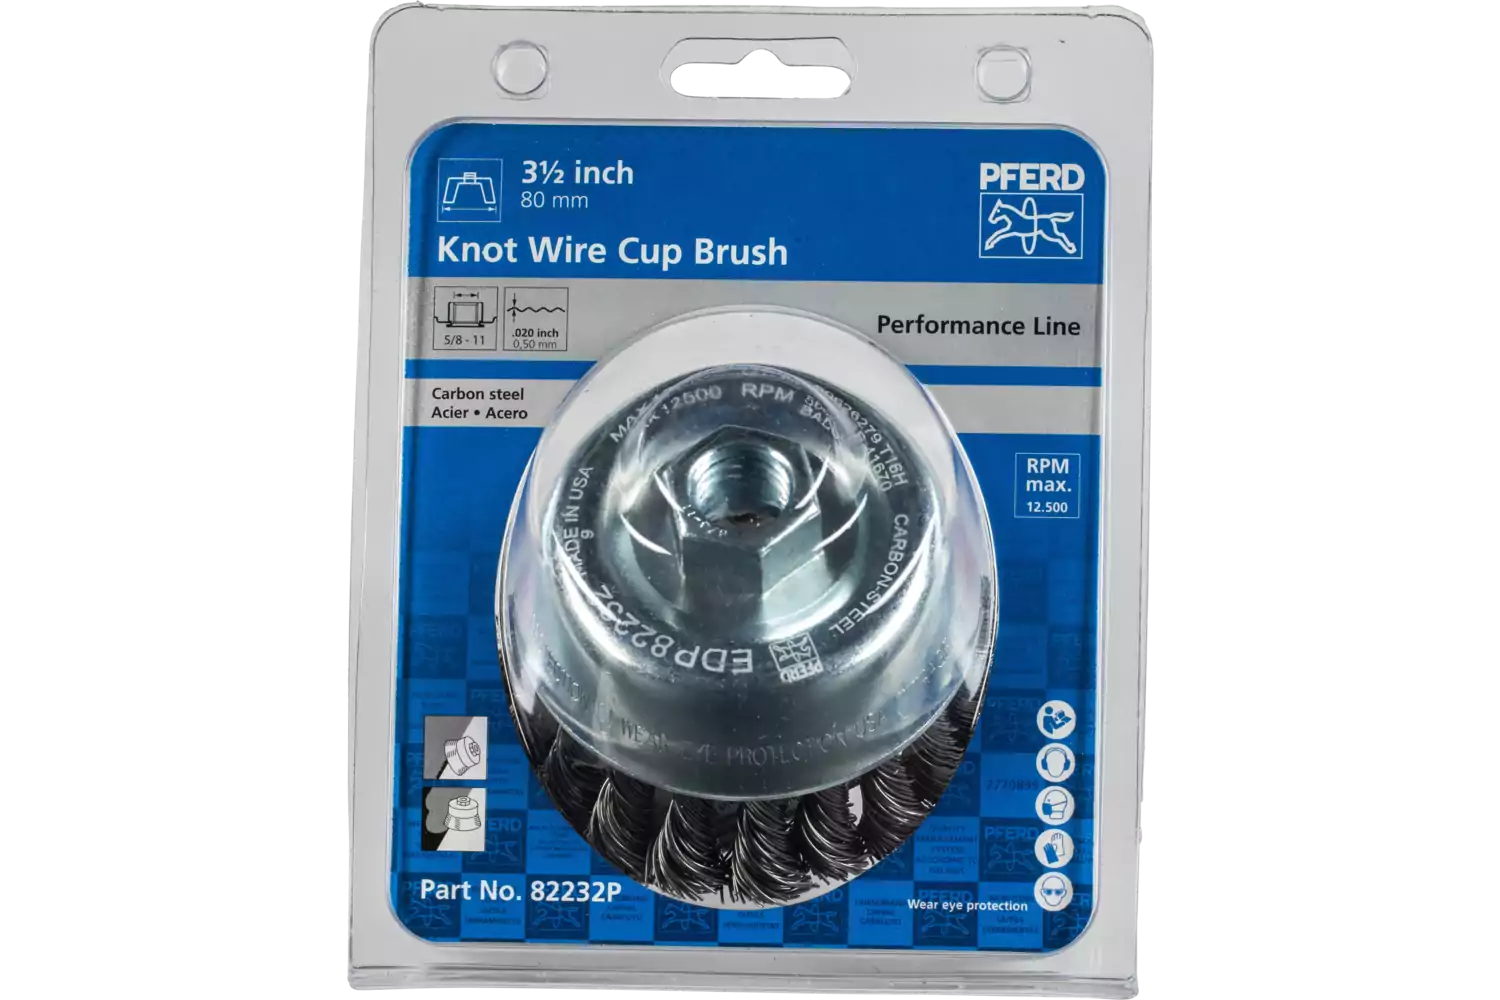 Knot Wire Cup Brush PSF 3-1/2" Dia. .020 Carbon Steel 5/8-11" Thread Retail 2